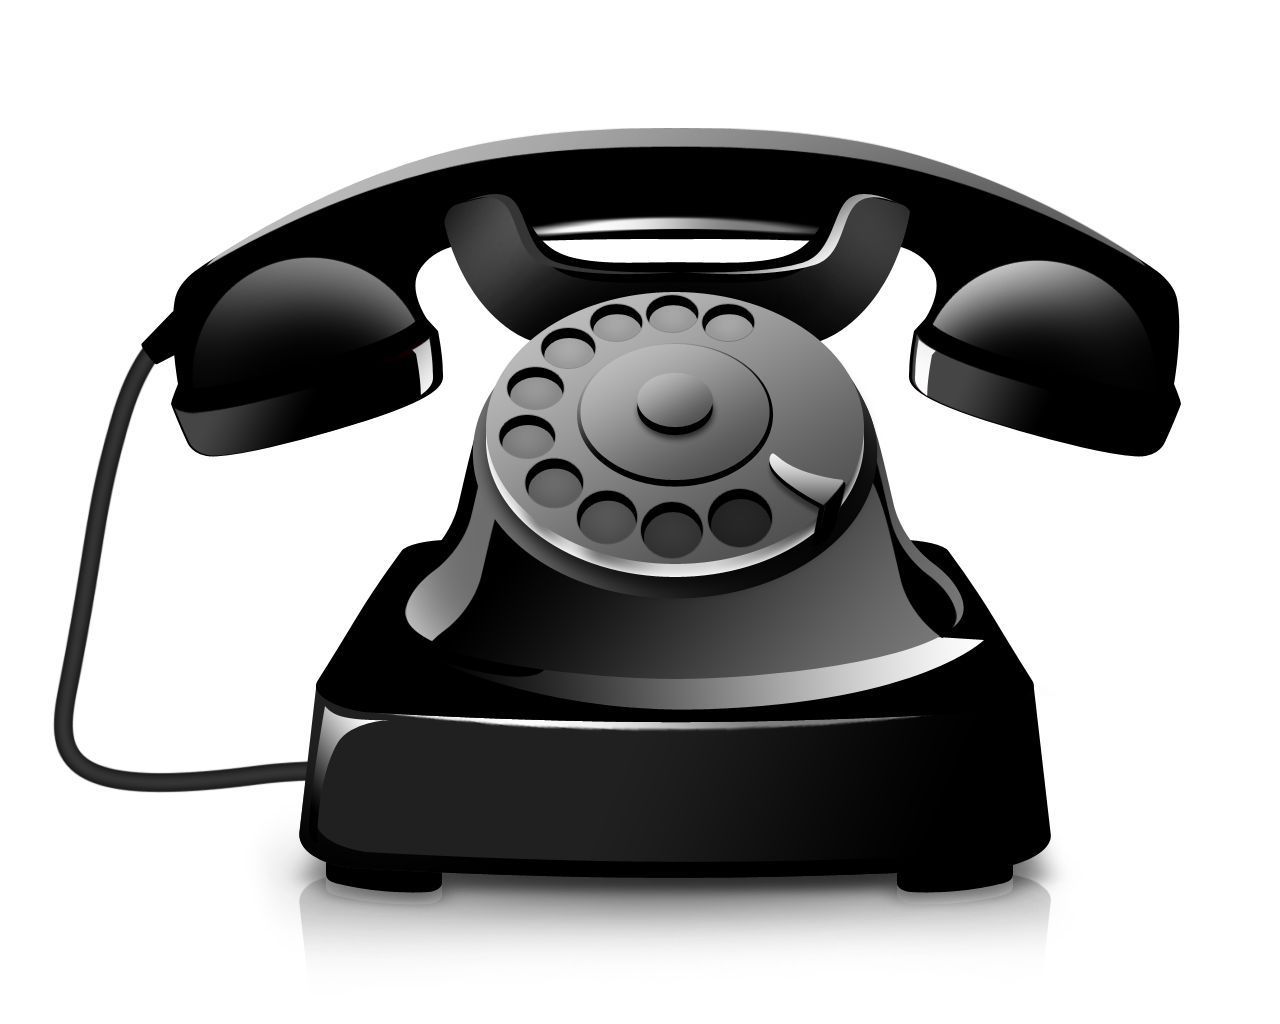 Telephone - Telephone Image, Transparent background PNG HD thumbnail